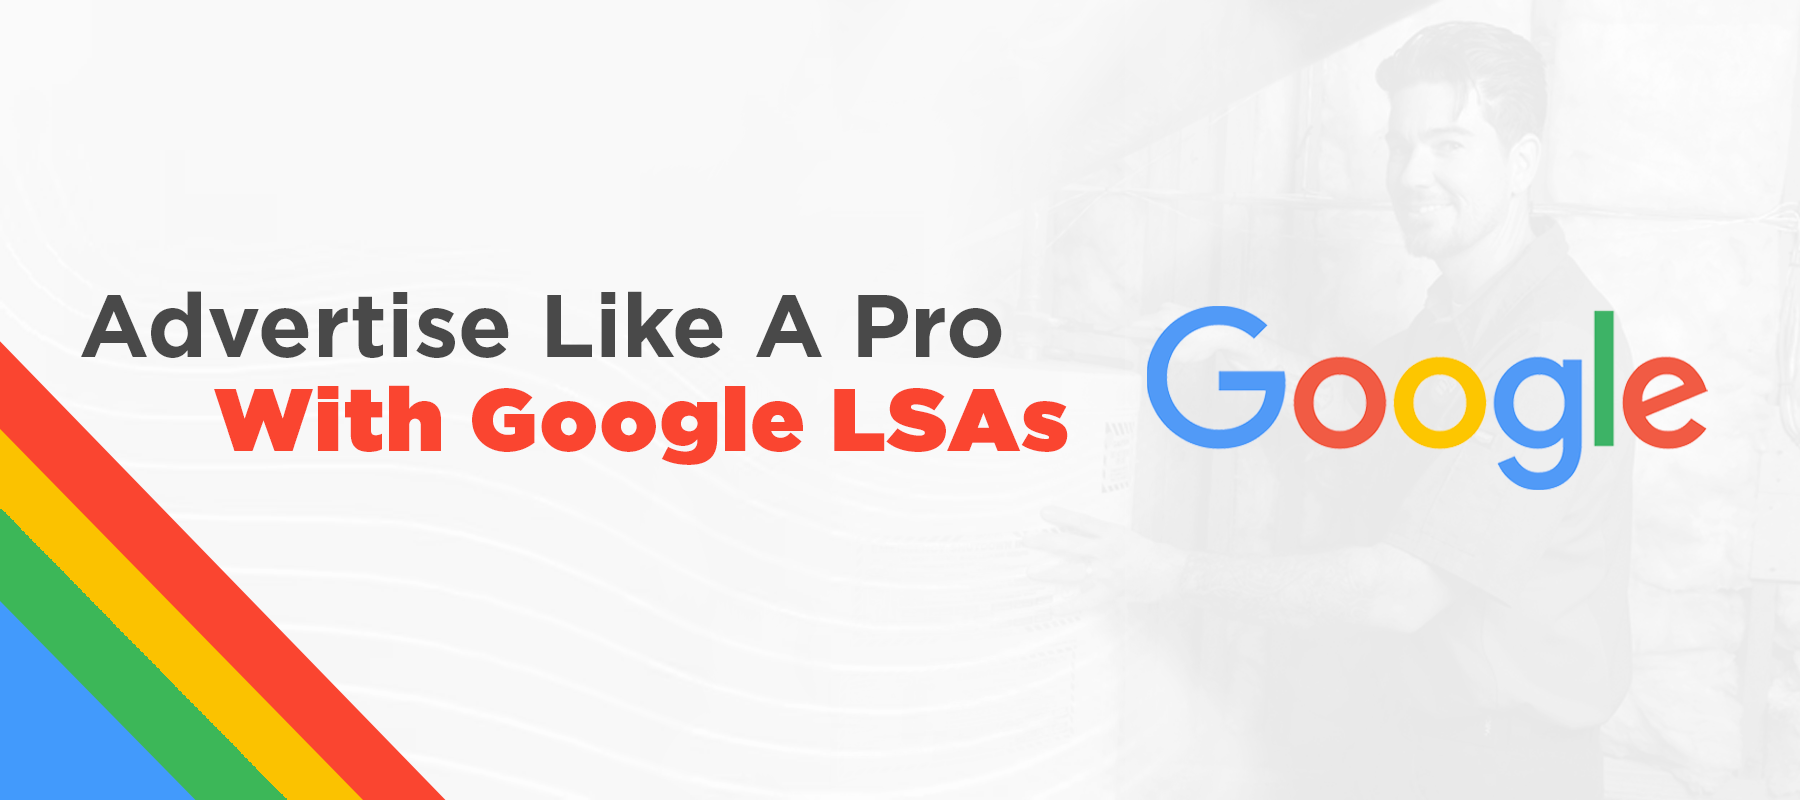 advertise like a pro banner with google logo and branding colors